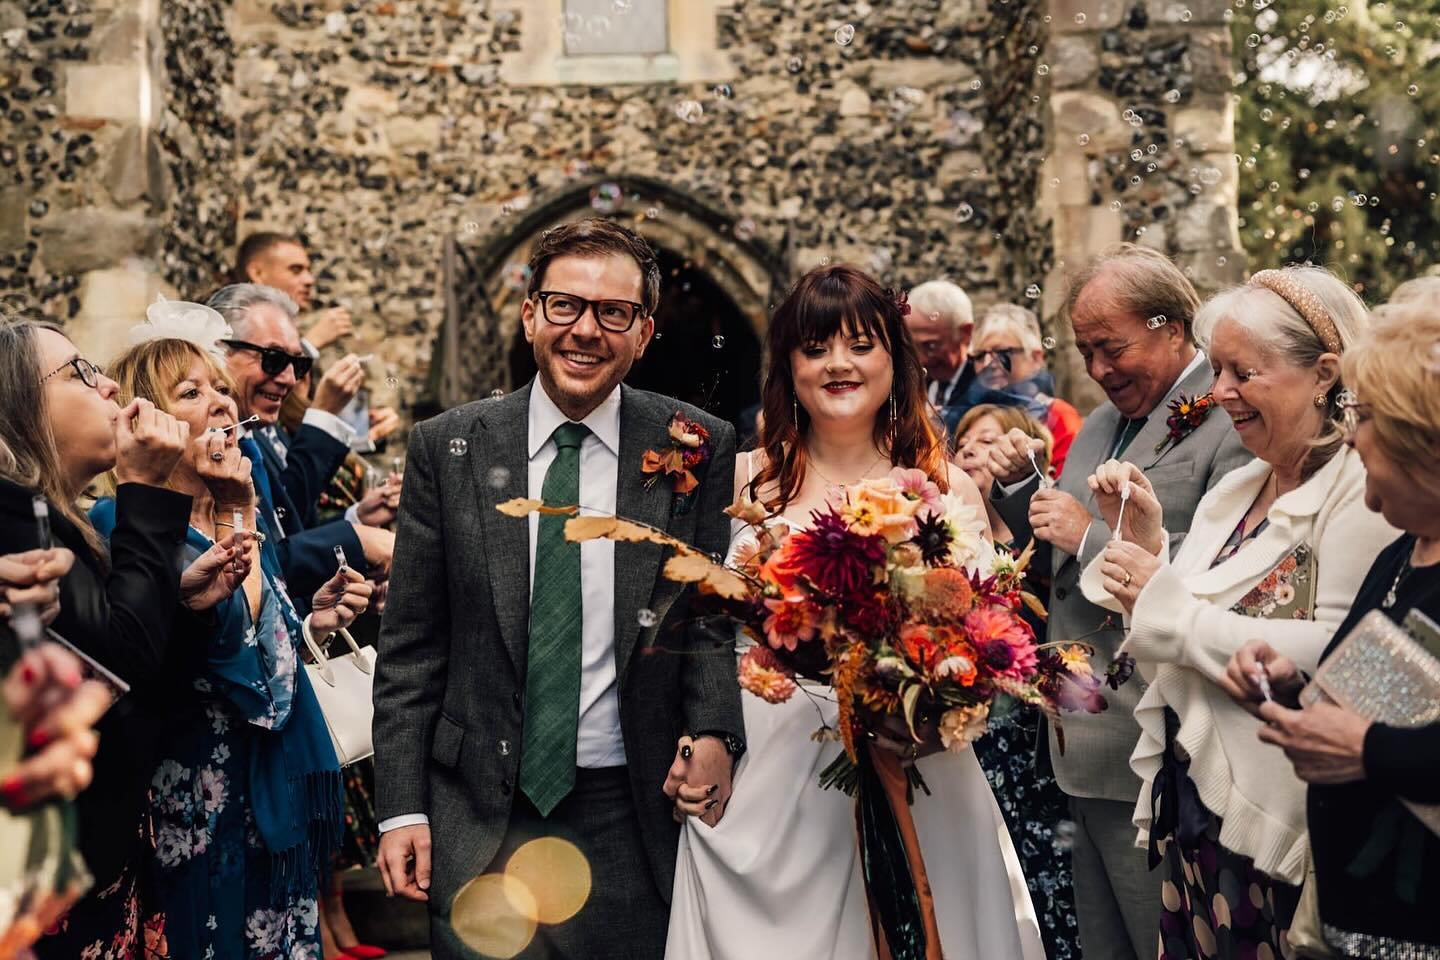 I am chomping at the bit to get back into wedding season. It&rsquo;s been TOO LONG and I&rsquo;m so excited to get creative, use some new kit (!!!) and see smiley happy faces all day longgggg!! 
Loved this day 🖤